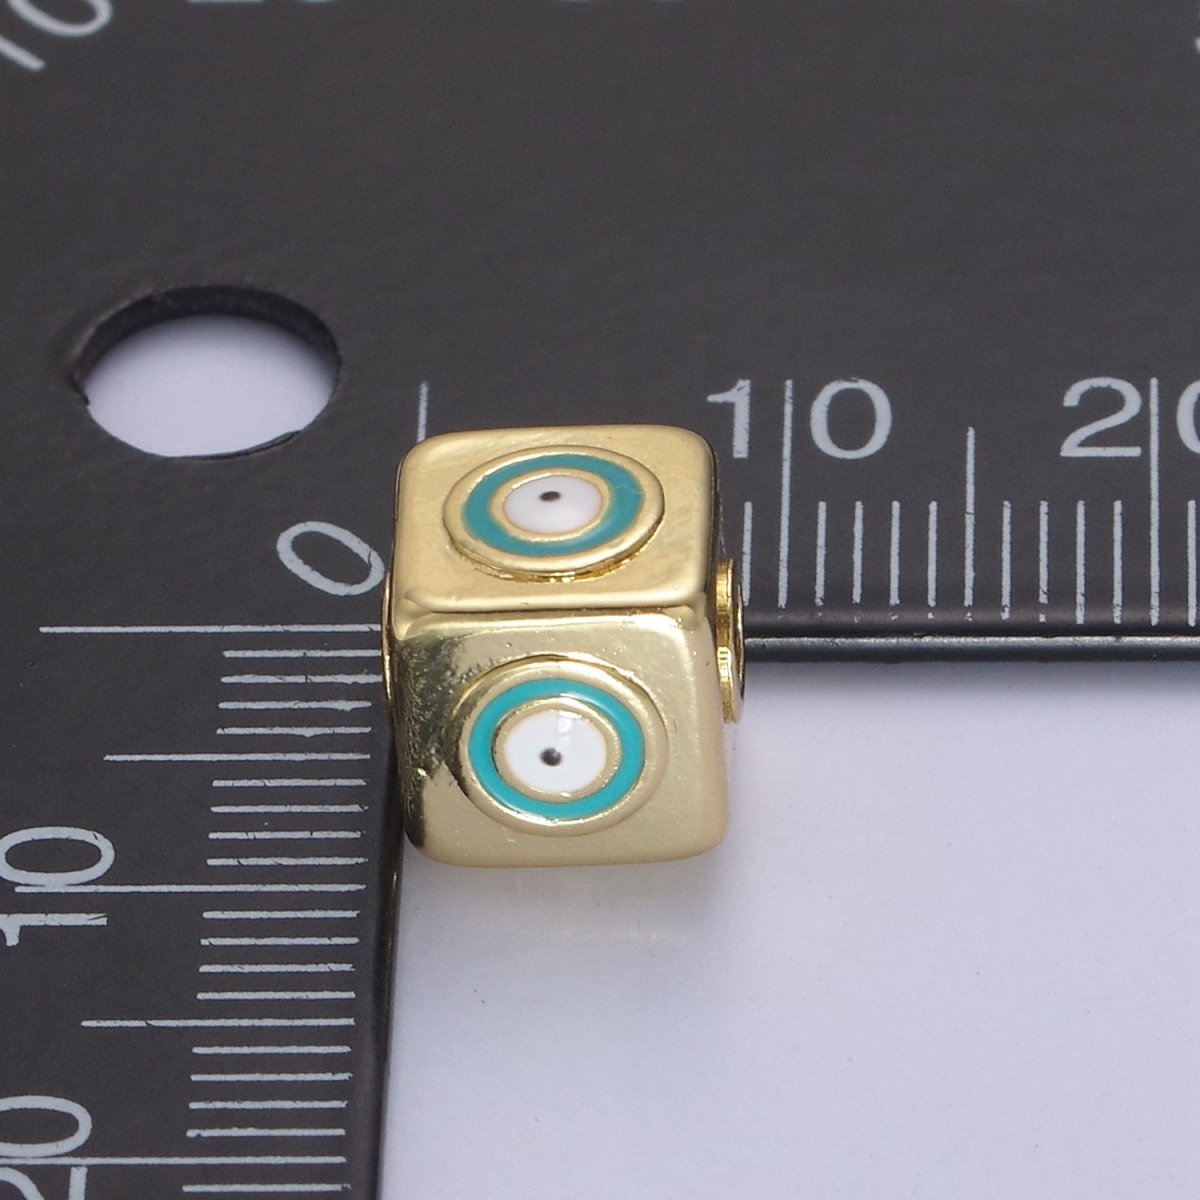 9mm Evil eye Cube charm Beads, Square Spacer Beads on Four Sides, Turkish Evil Eye, Gold bead Spacer Lucky Symbol Cube Bead B-774 to B-779 - DLUXCA